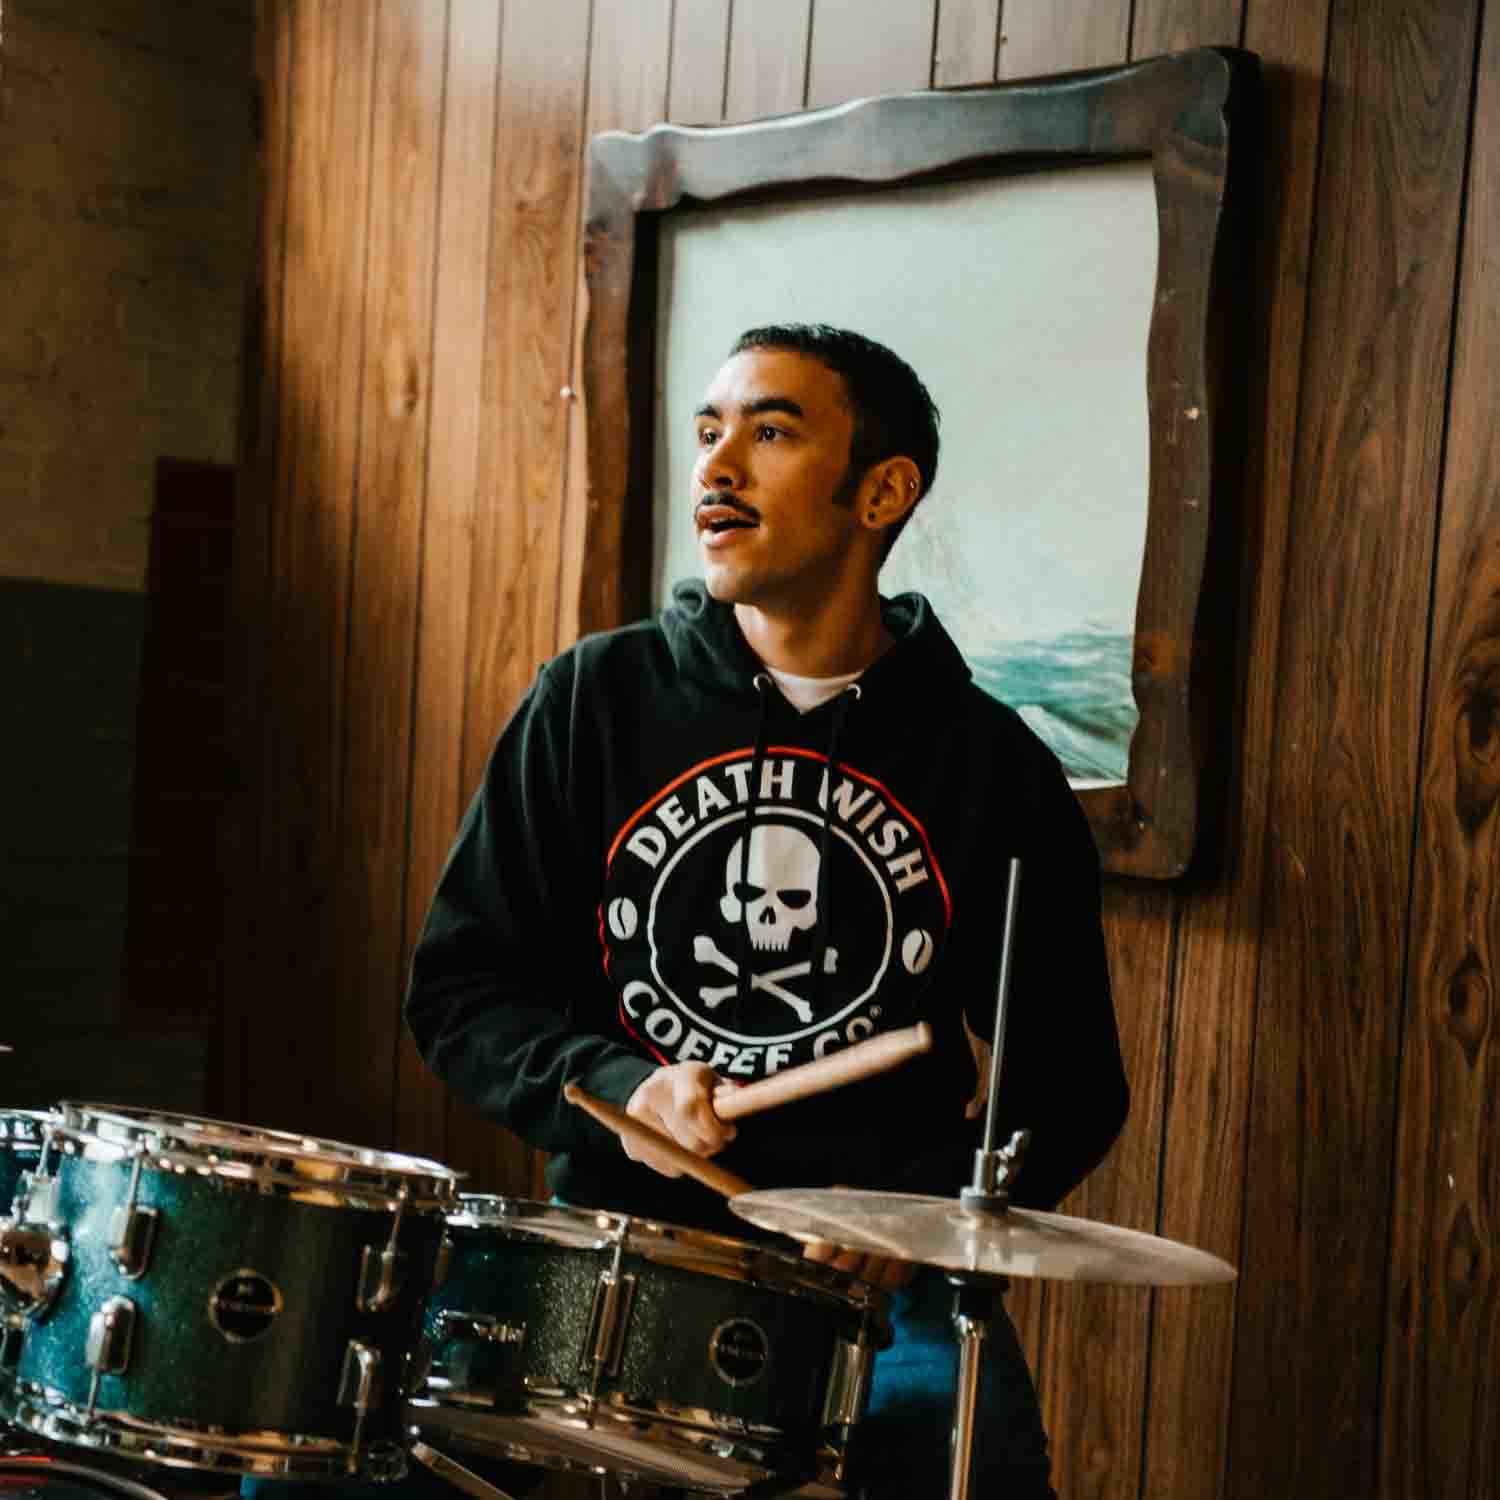 Playing the drums in the Death Wish Coffee Classic Logo Hoodie.